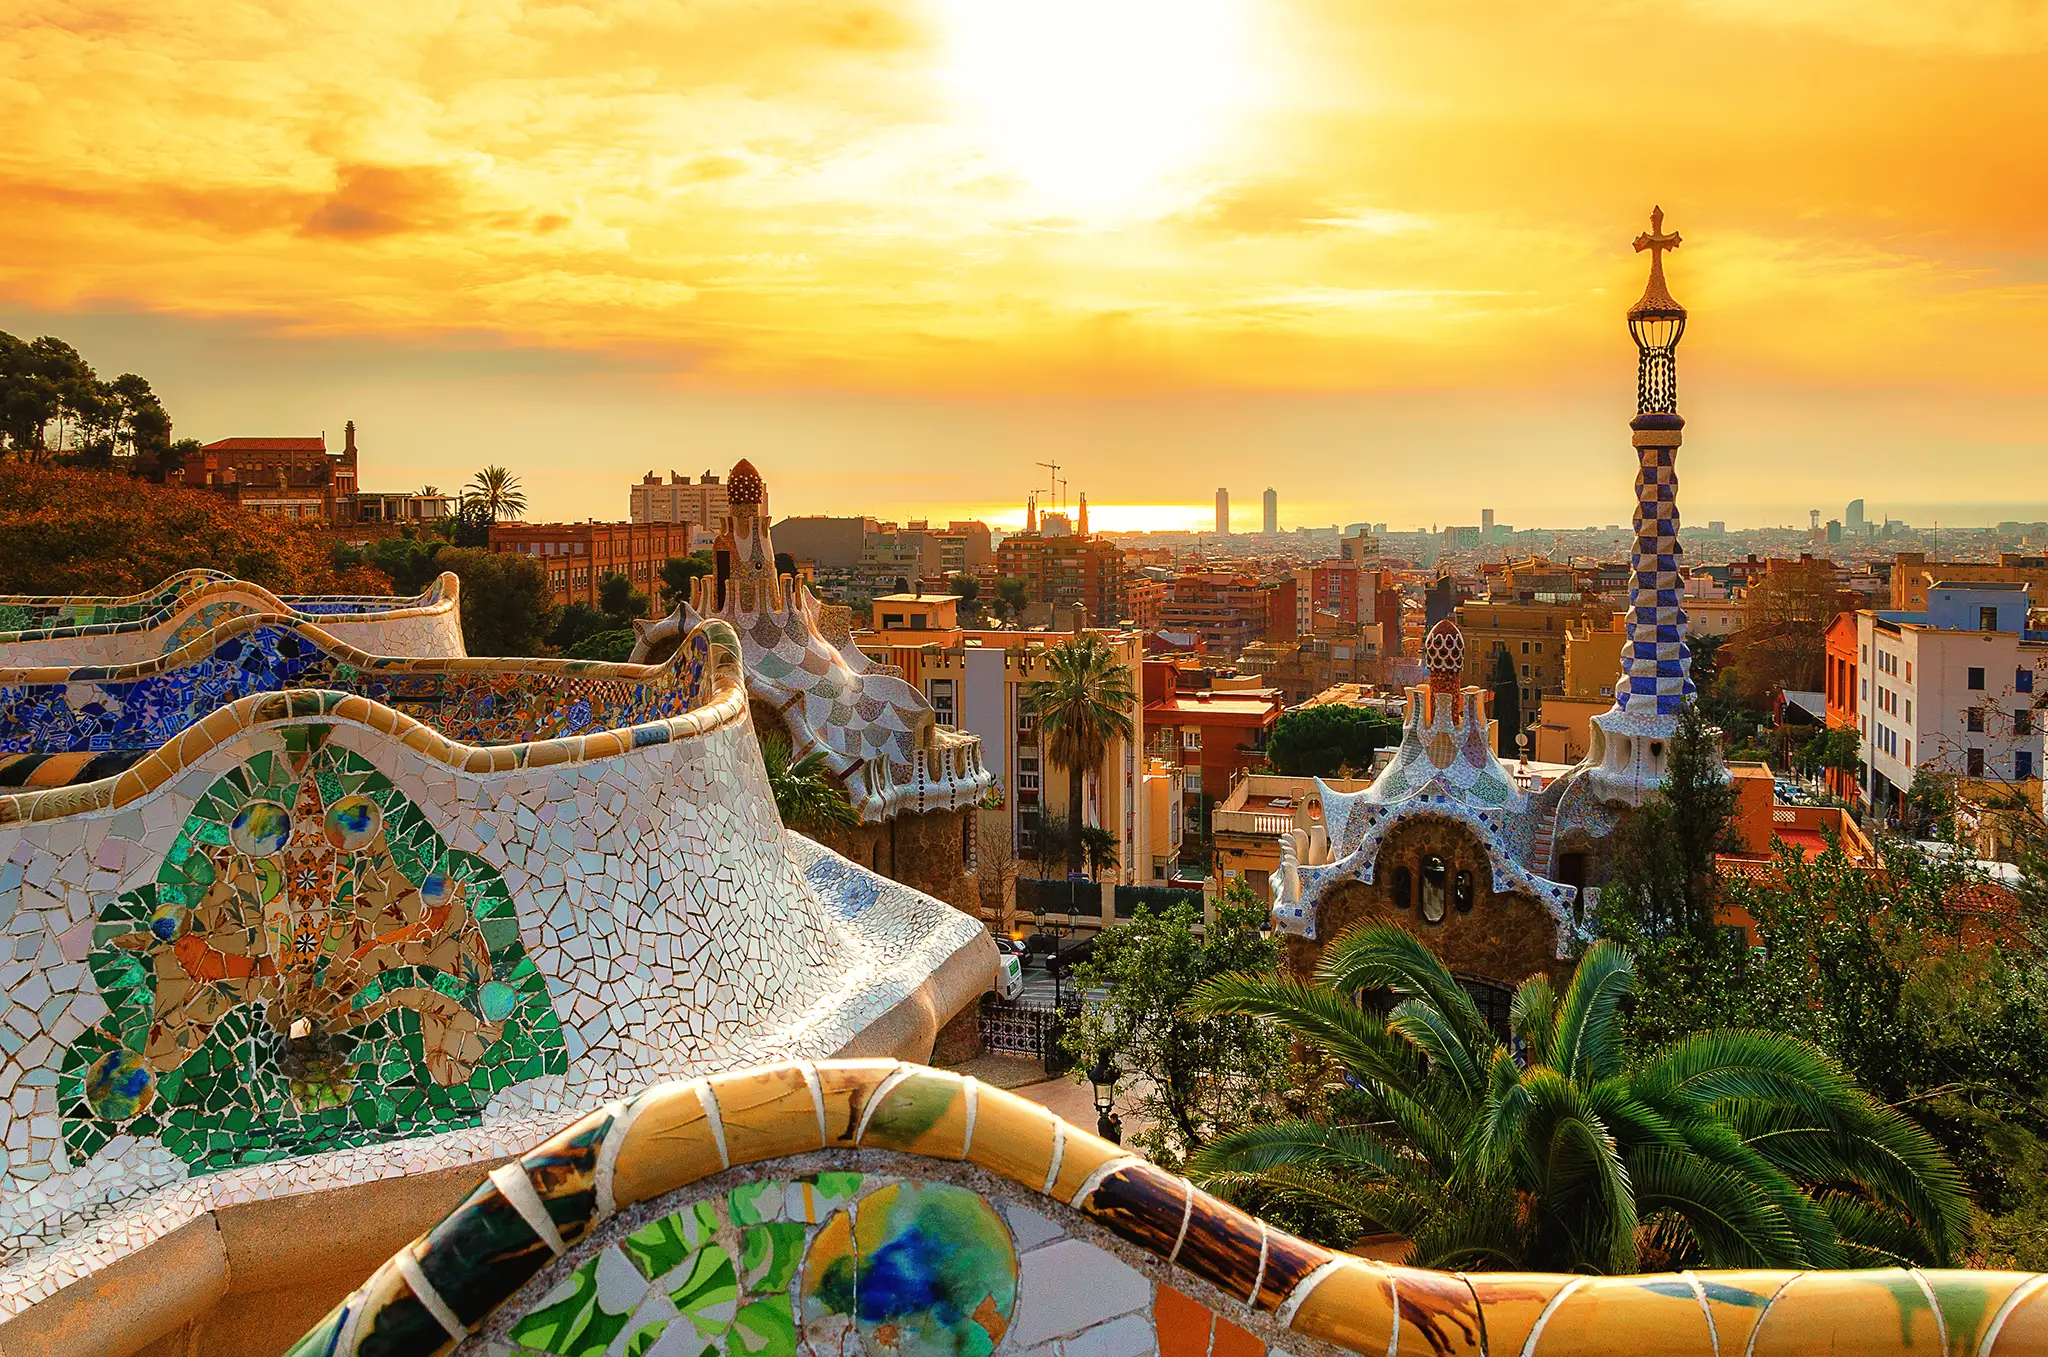 View of the city from Park Guell in Barcelona, Spain.